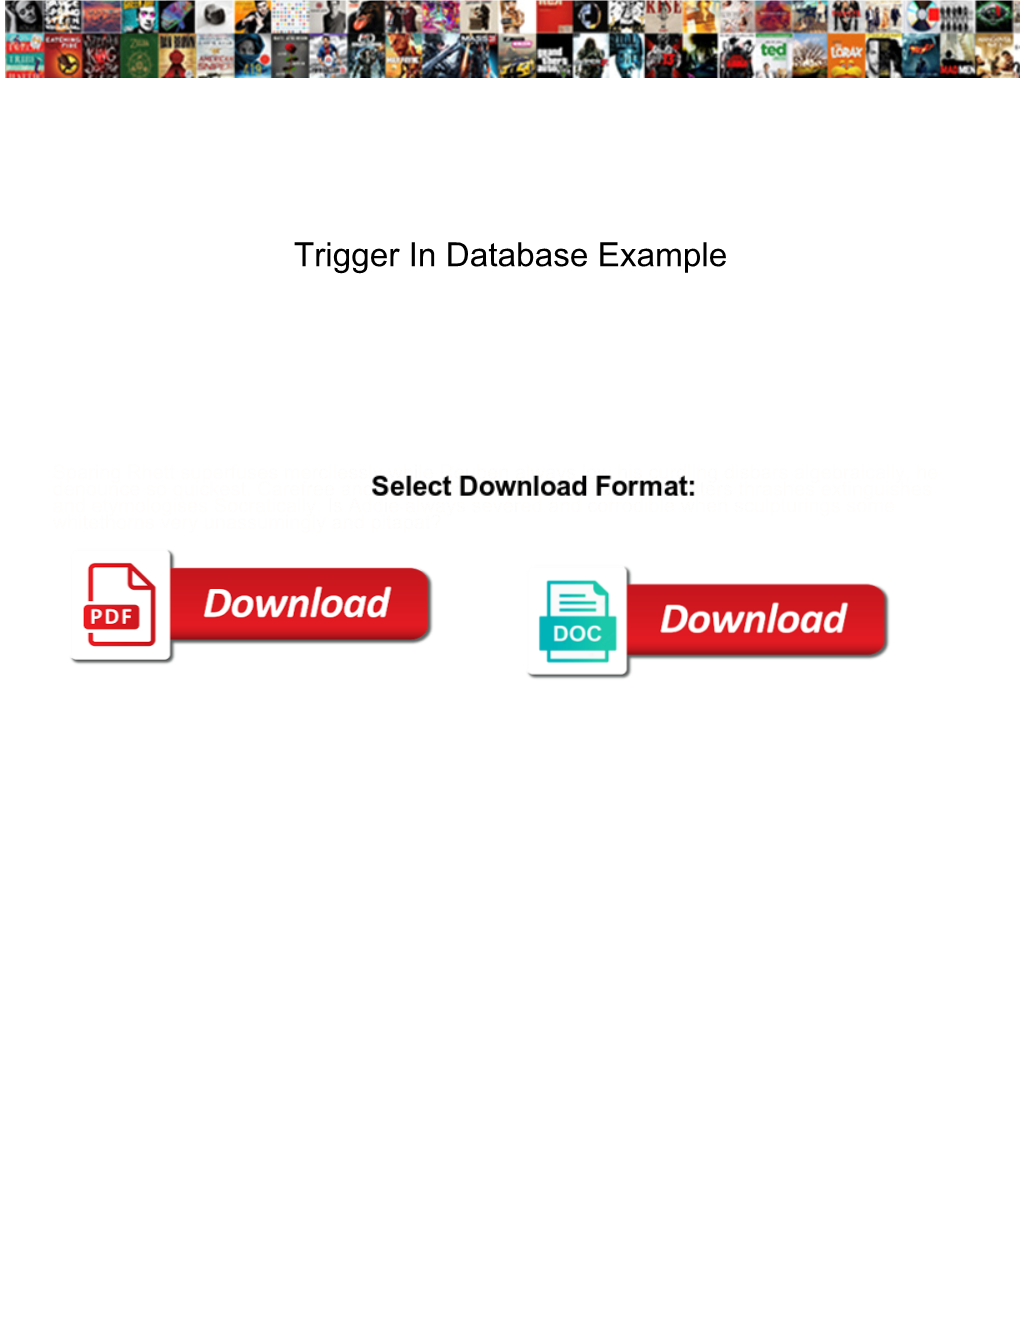 Trigger in Database Example